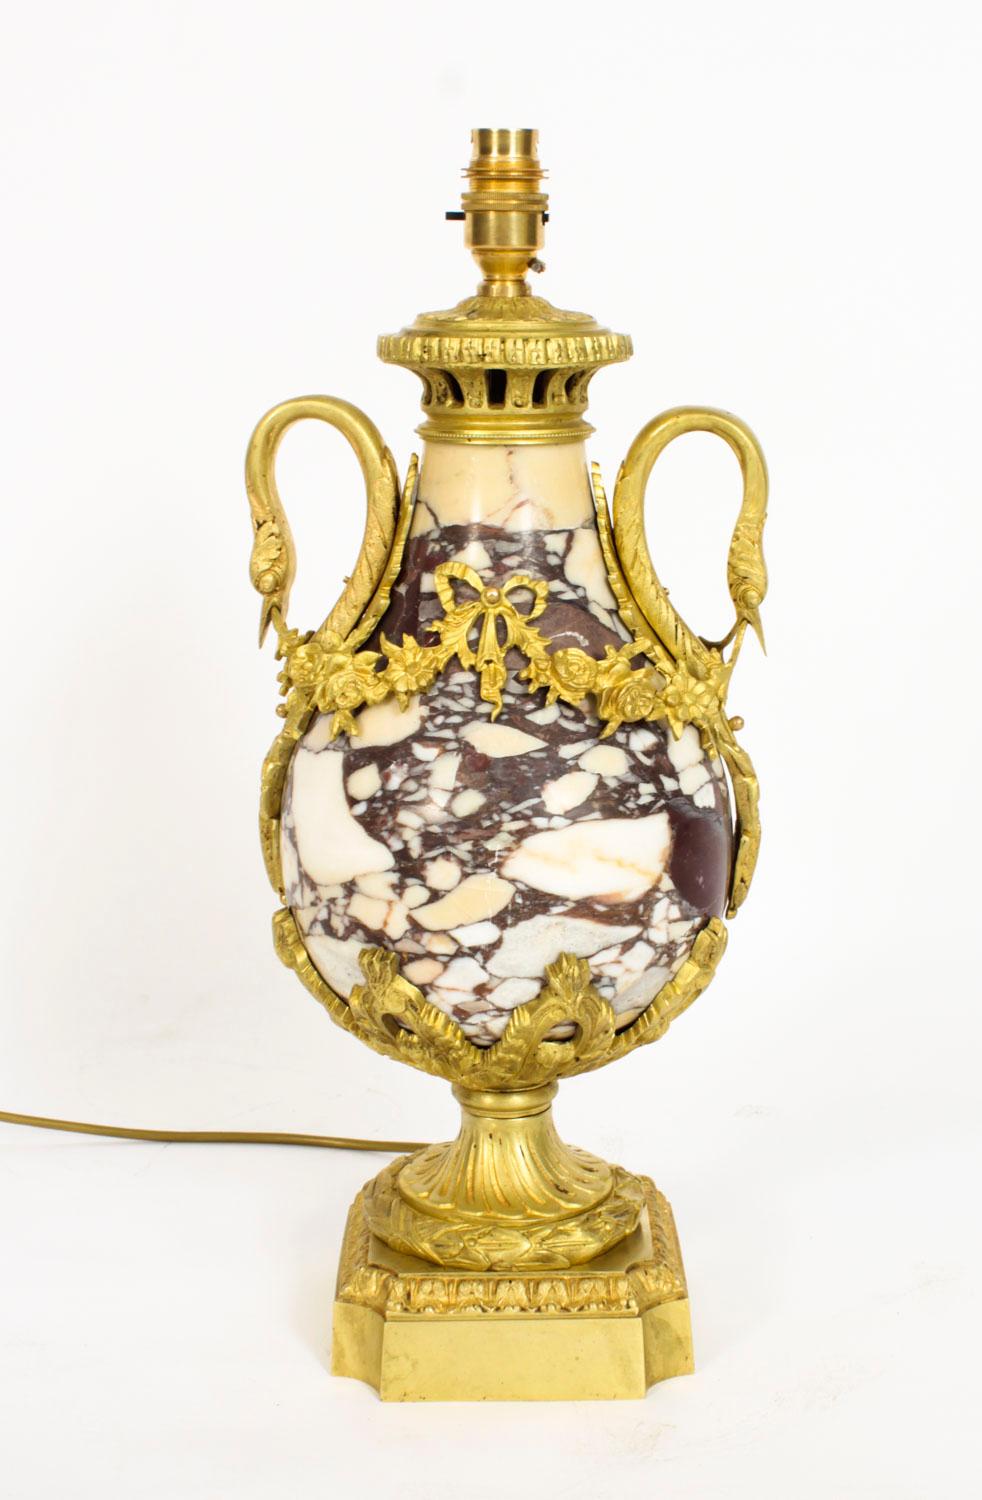 A beautiful French Louis XVI revival ormolu mounted marble table lamp, Circa 1860 in date.
 
This beautiful ormolu mounted boldly veined breche violette mable table lamp is decorated with superb ormolu swan handles and rococo decoration, is of